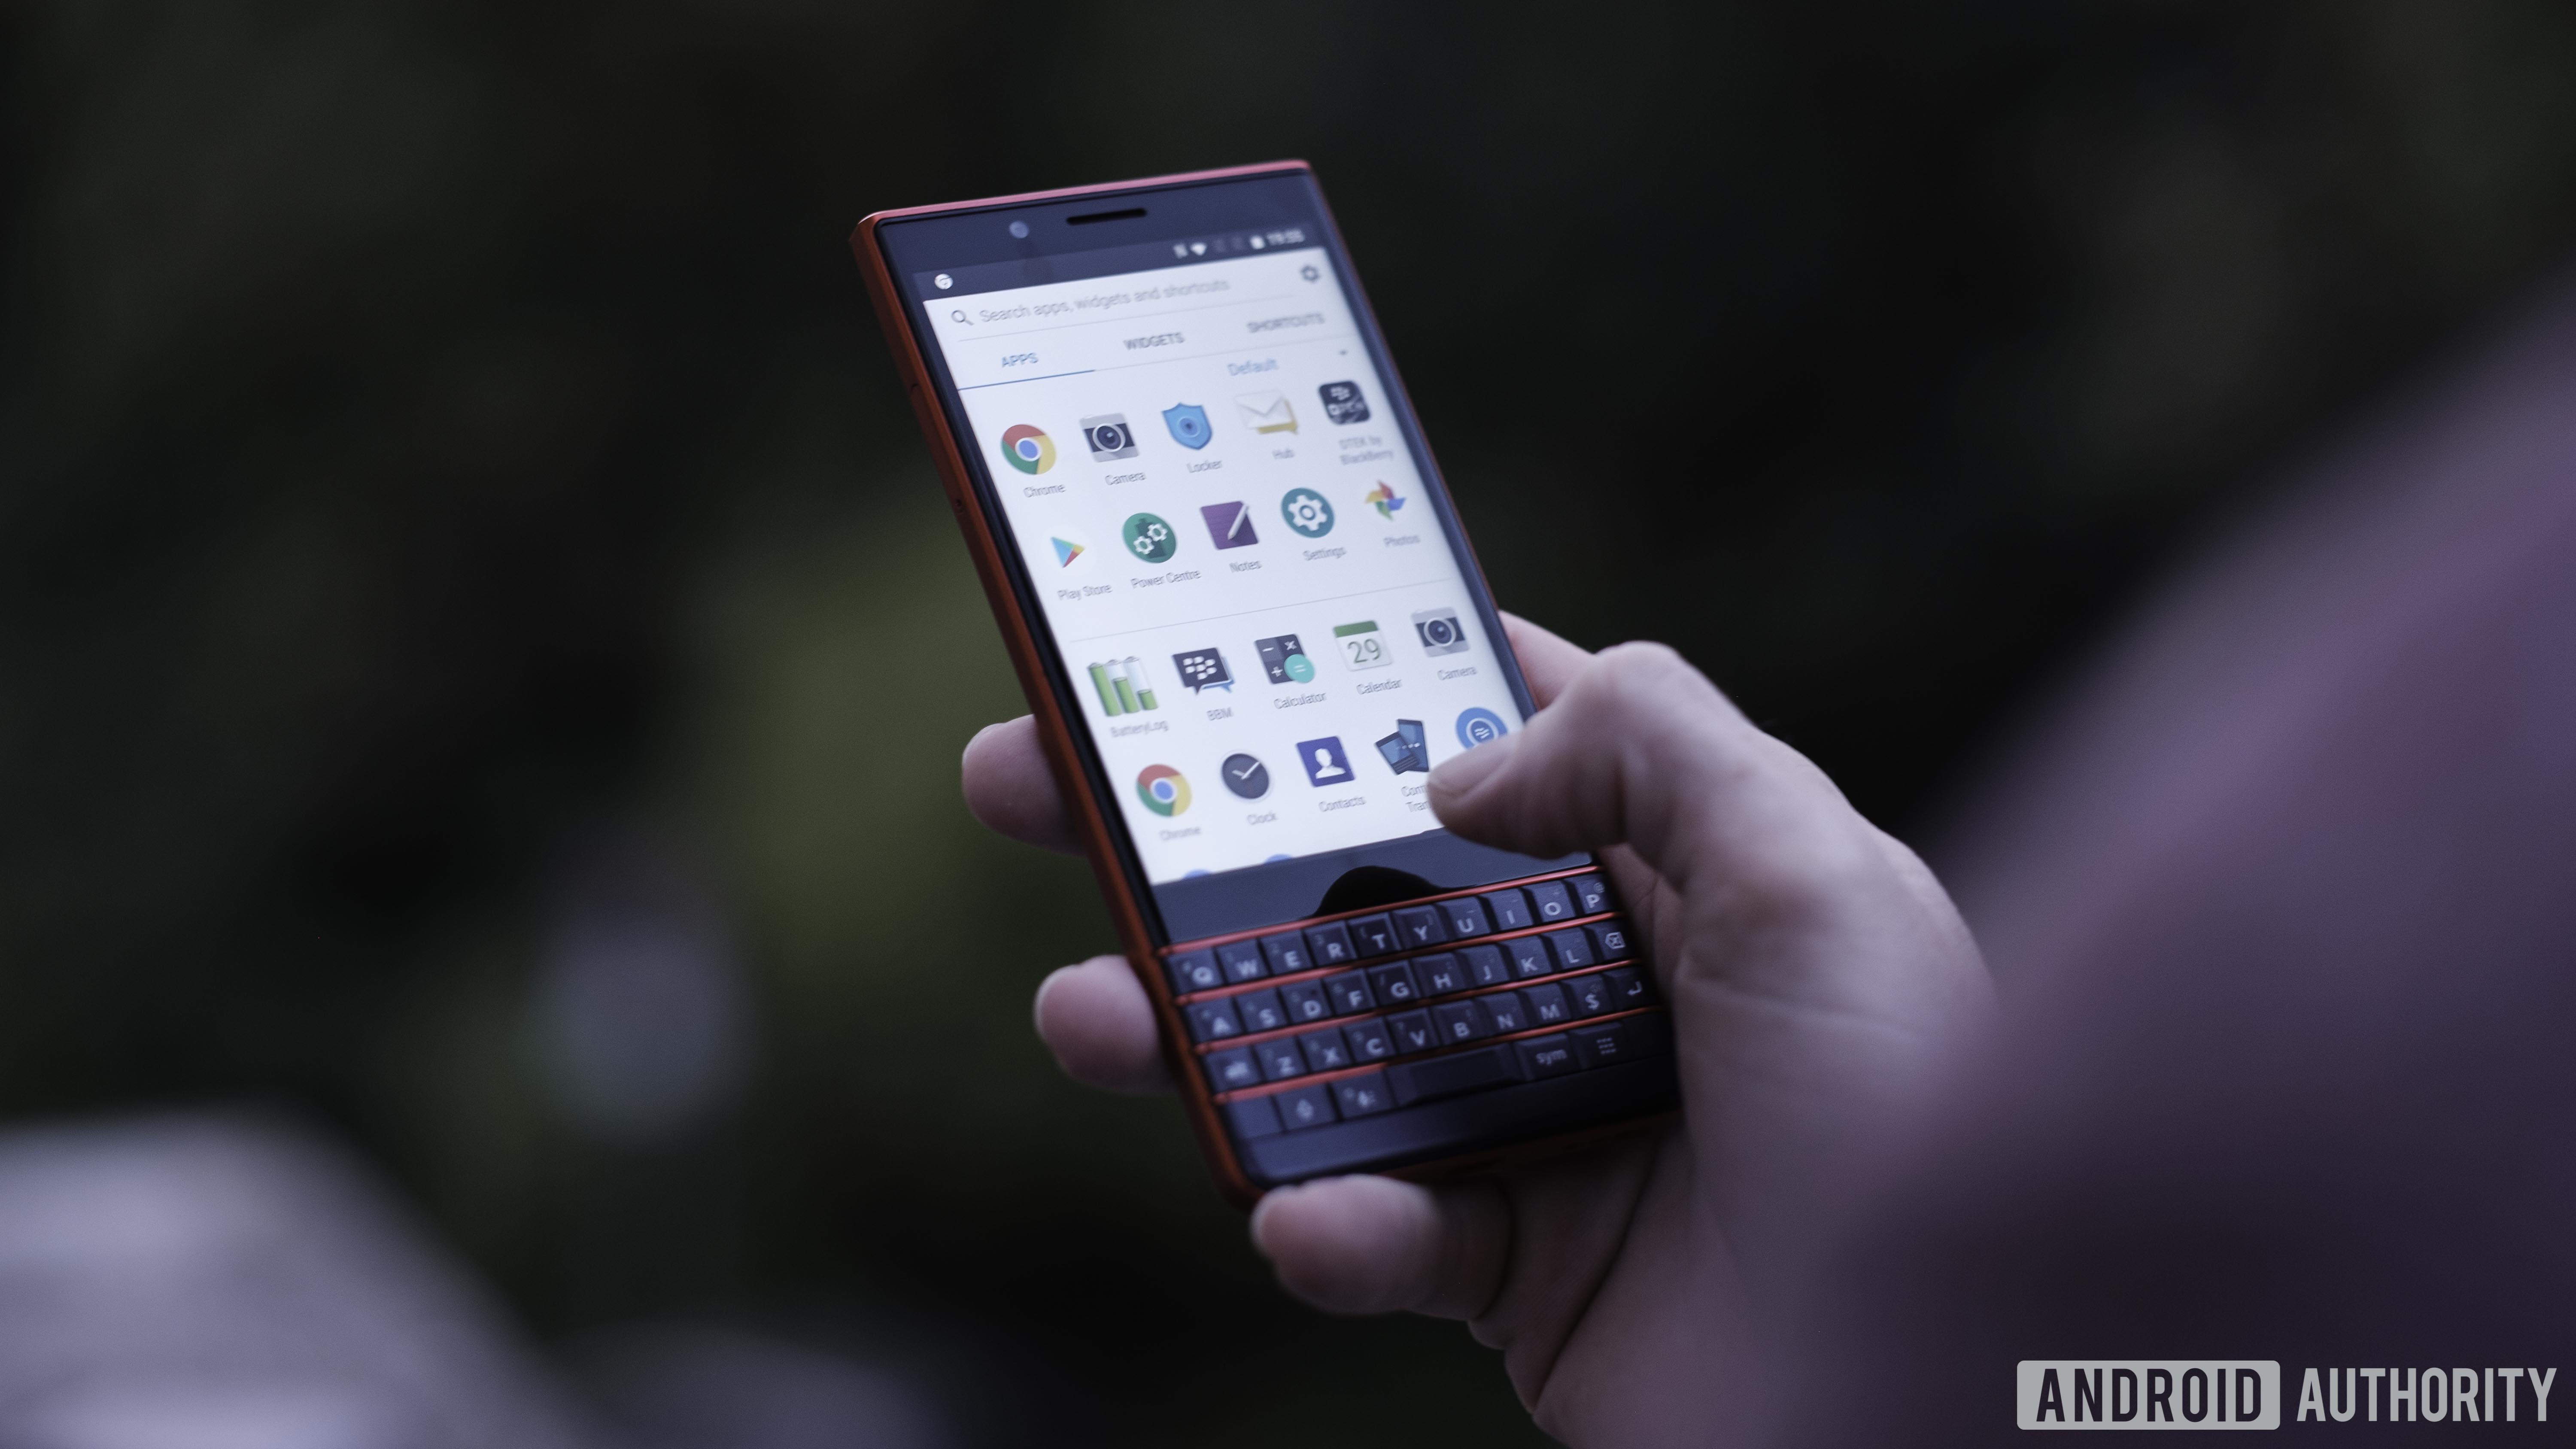 Blackberry Key2 LE front, keyboard with atomic red frets, showing preloaded apps and BlackBerry features